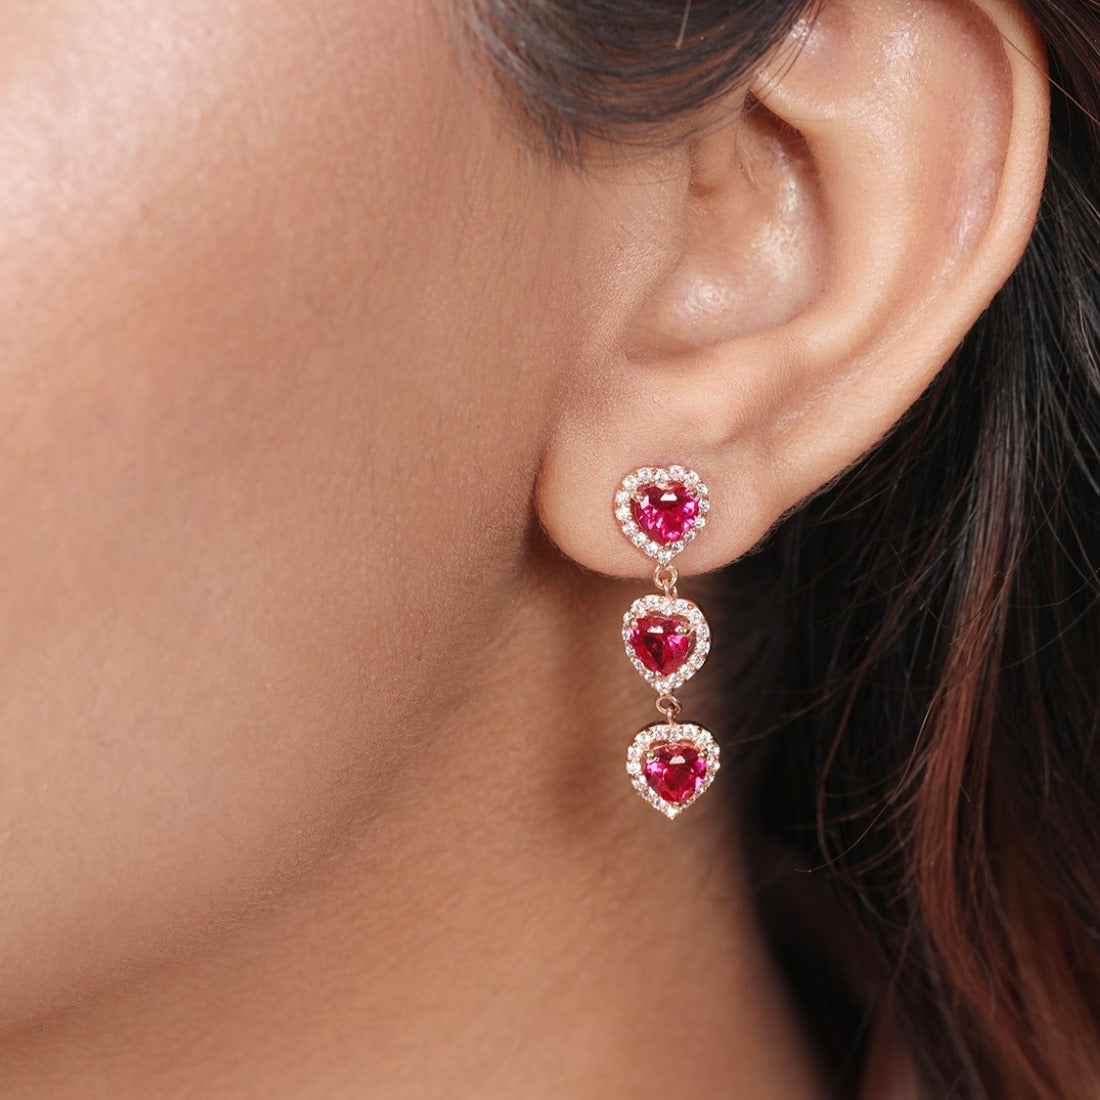 Rosy Love 925 Sterling Silver Heart Earrings with Cubic Zirconia